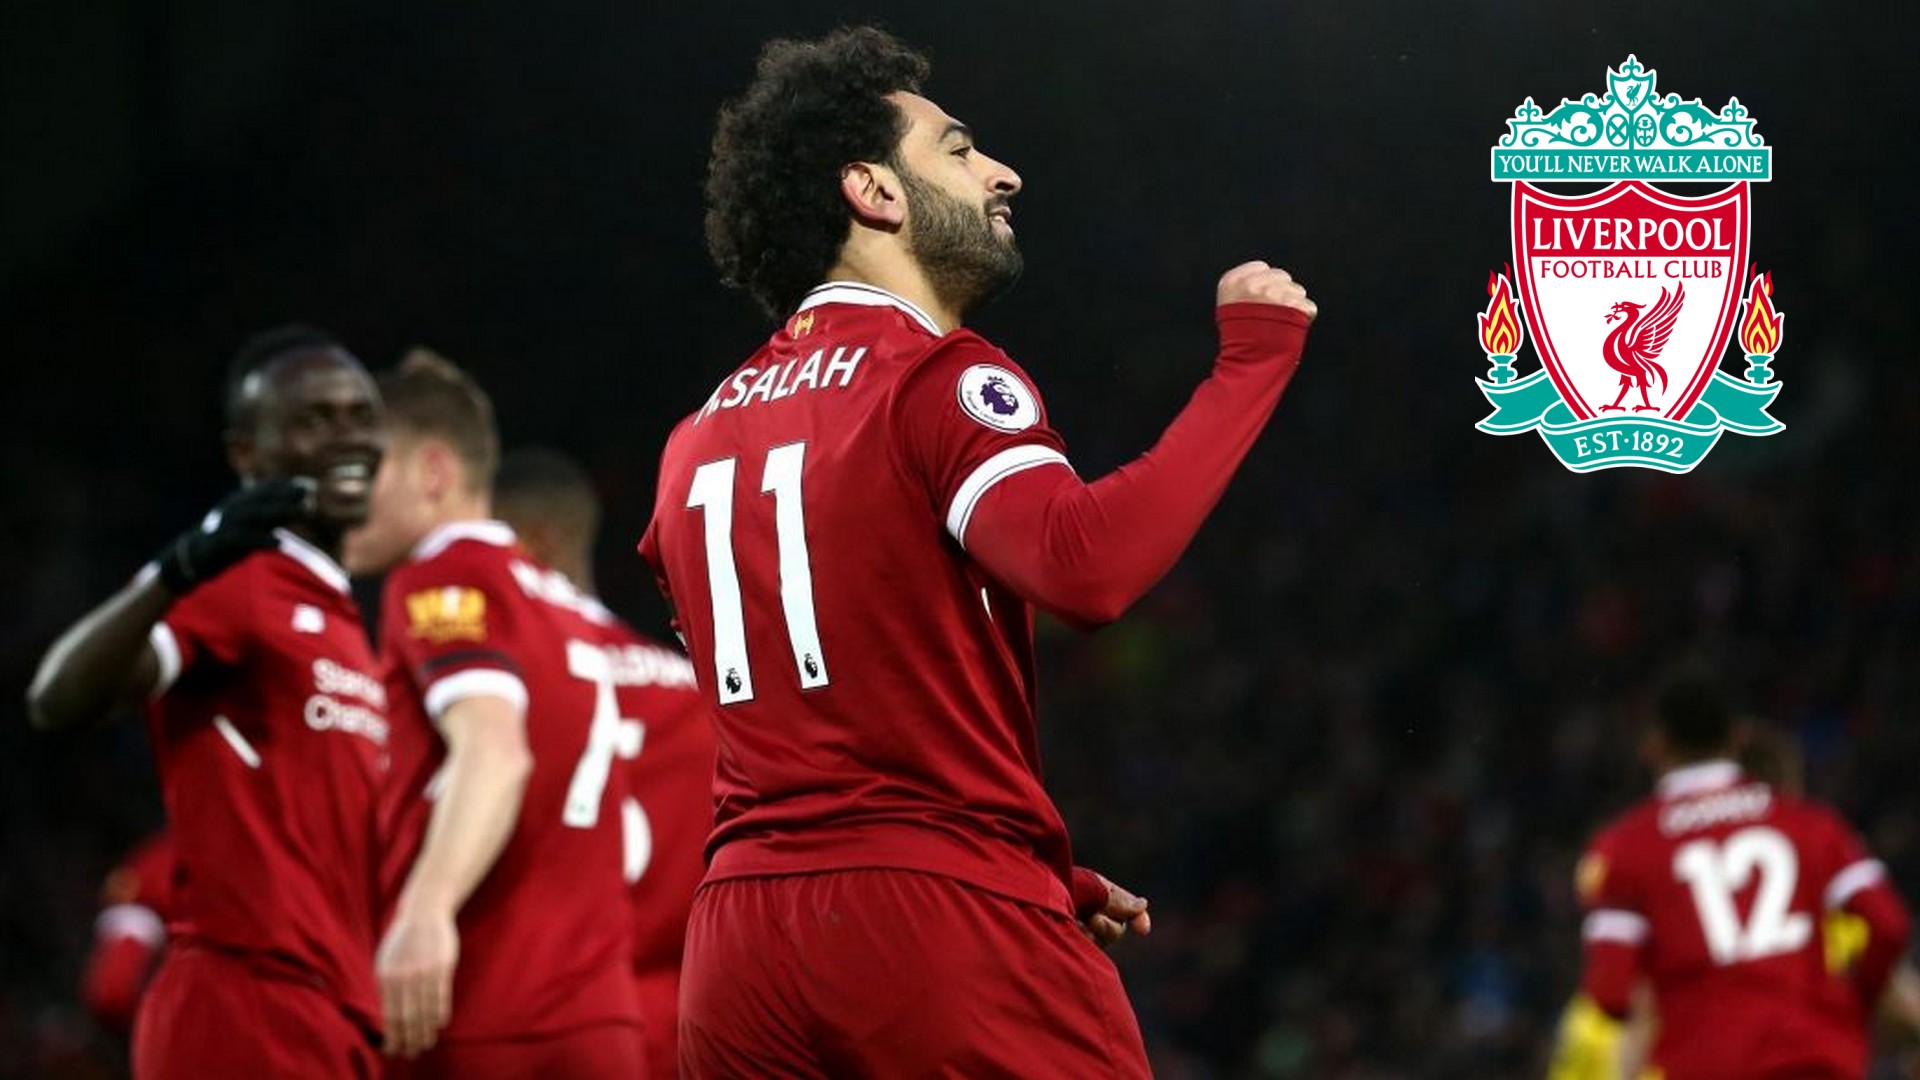 Mohamed Salah Background Wallpaper HD With Resolution 1920X1080 pixel. You can make this wallpaper for your Desktop Computer Backgrounds, Mac Wallpapers, Android Lock screen or iPhone Screensavers